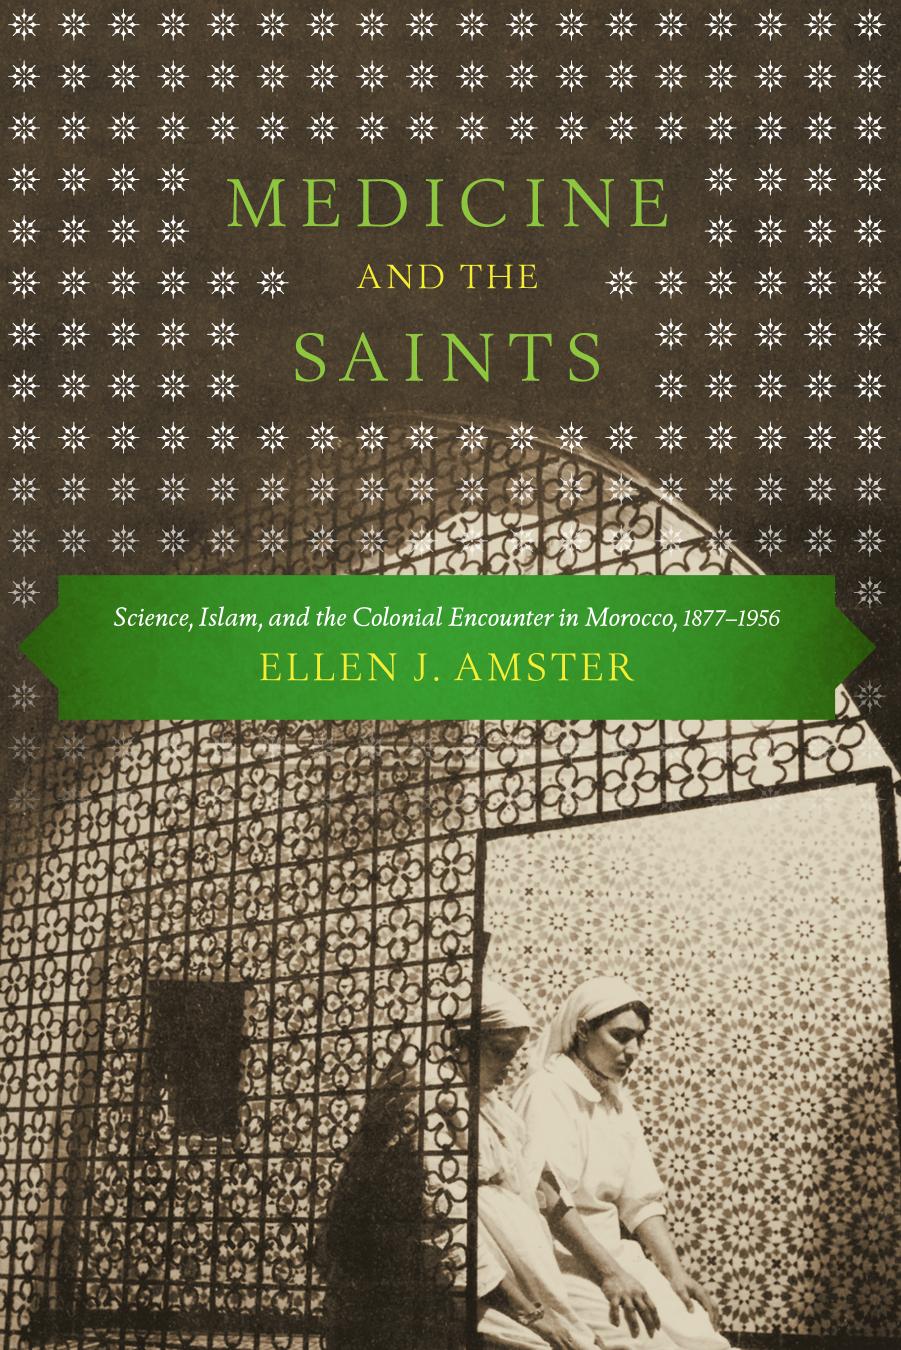 Medicine and the Saints: Science, Islam, and the Colonial Encounter in Morocco, 1877-1956 by Ellen J. Amster Rajae El Aoued